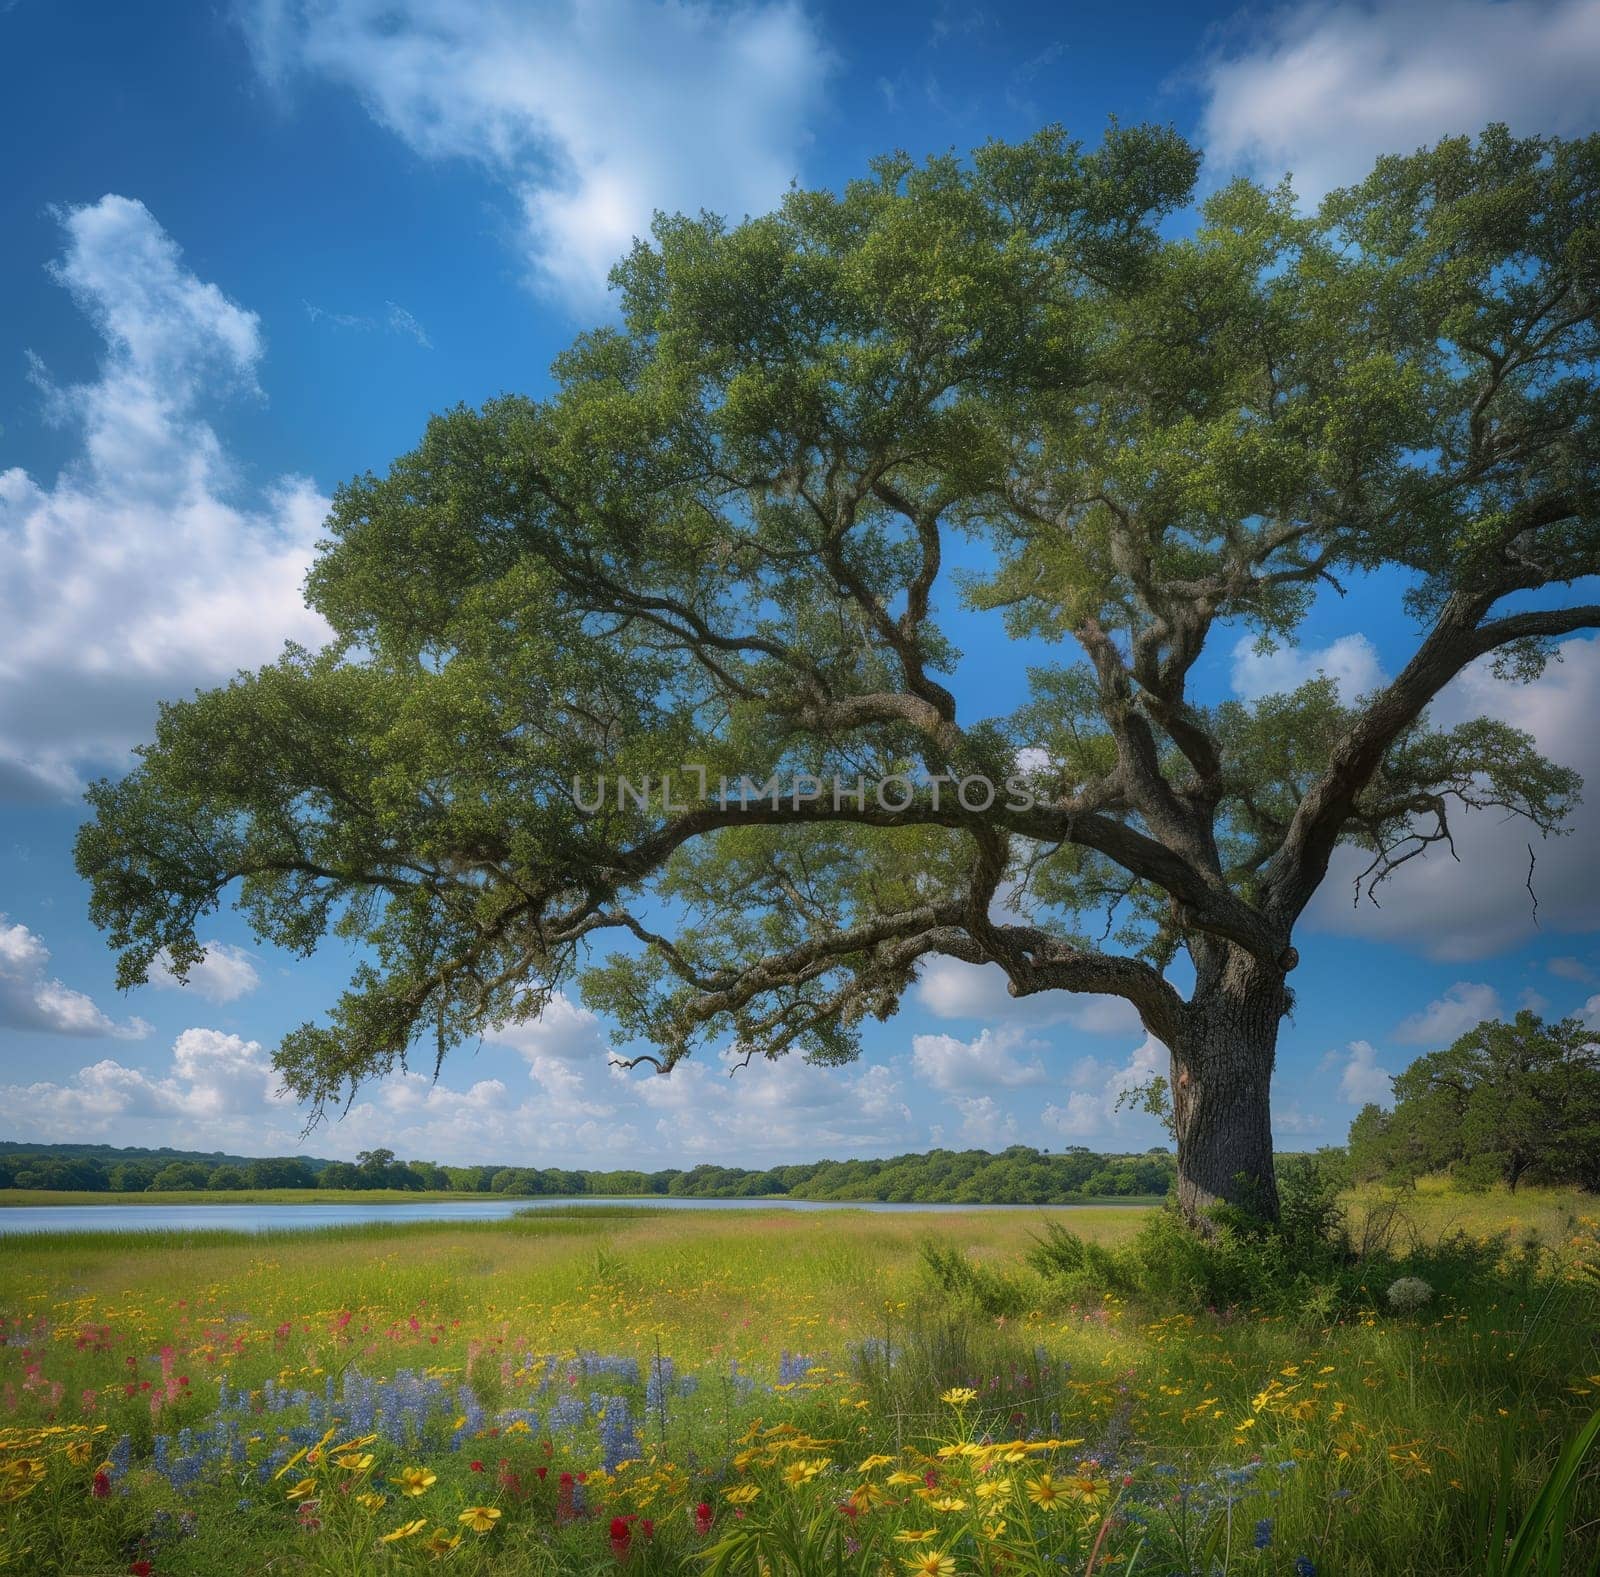 Majestic oak tree stands over a colorful wildflower meadow by a serene lake, exemplifying natural splendor